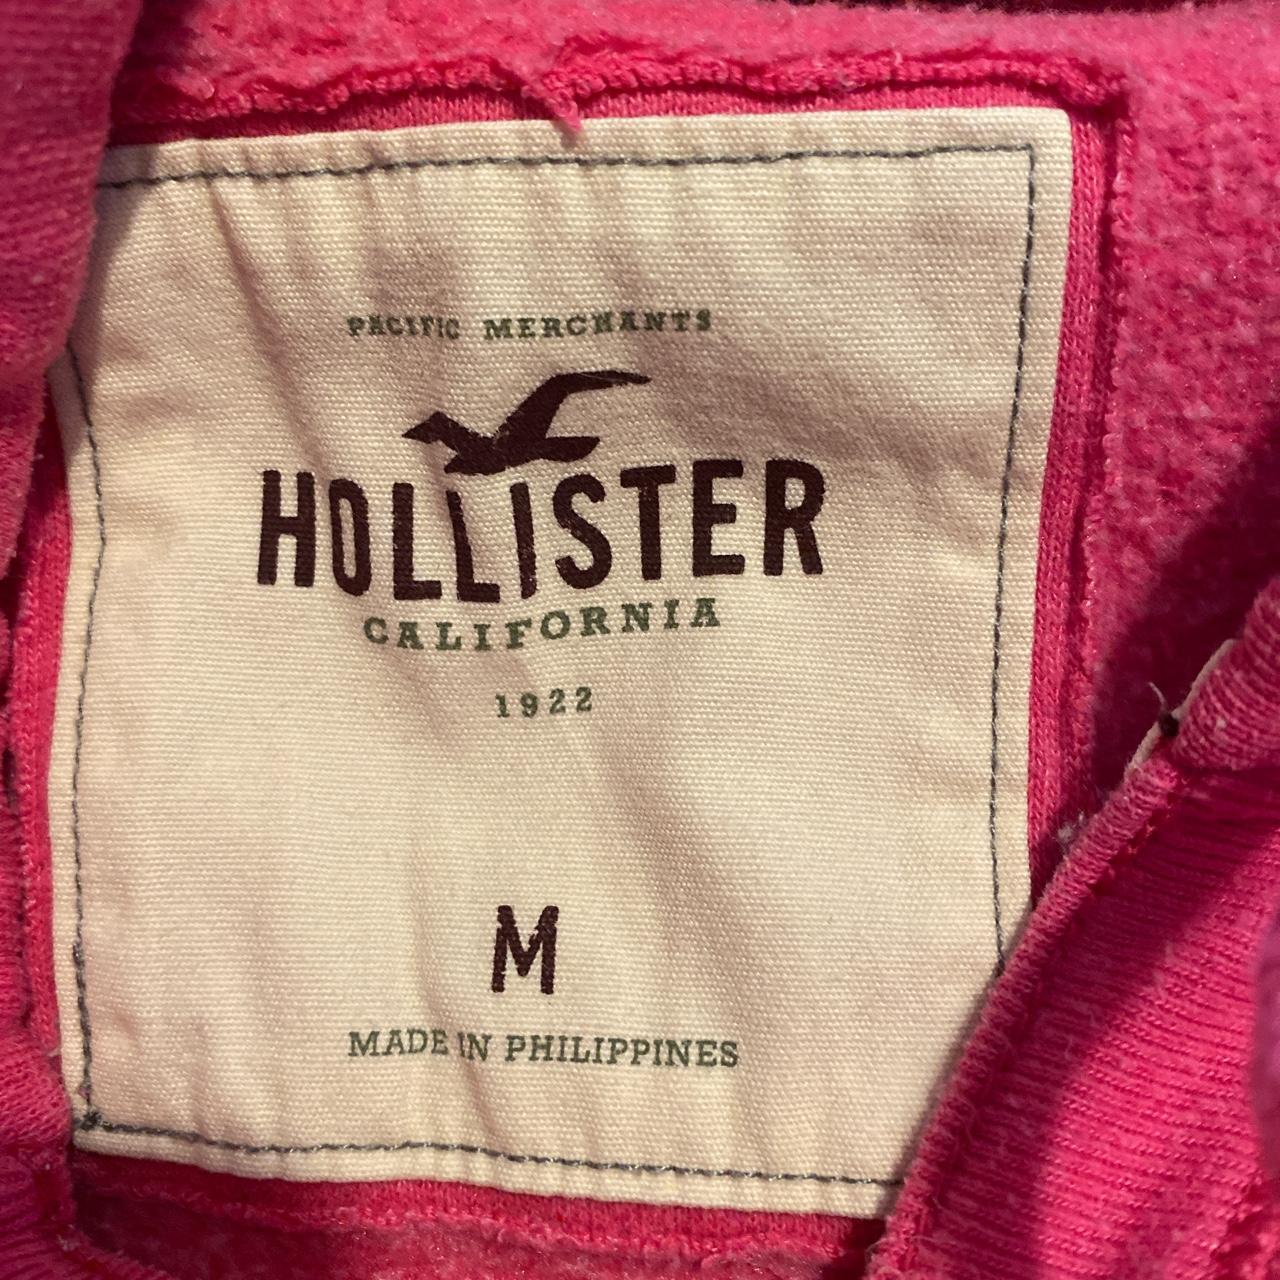 so i just ordered this hollister henley from another site. it's supposedly  in good condition with minor wear on fabric. if i were to sell it on depop  how much would it